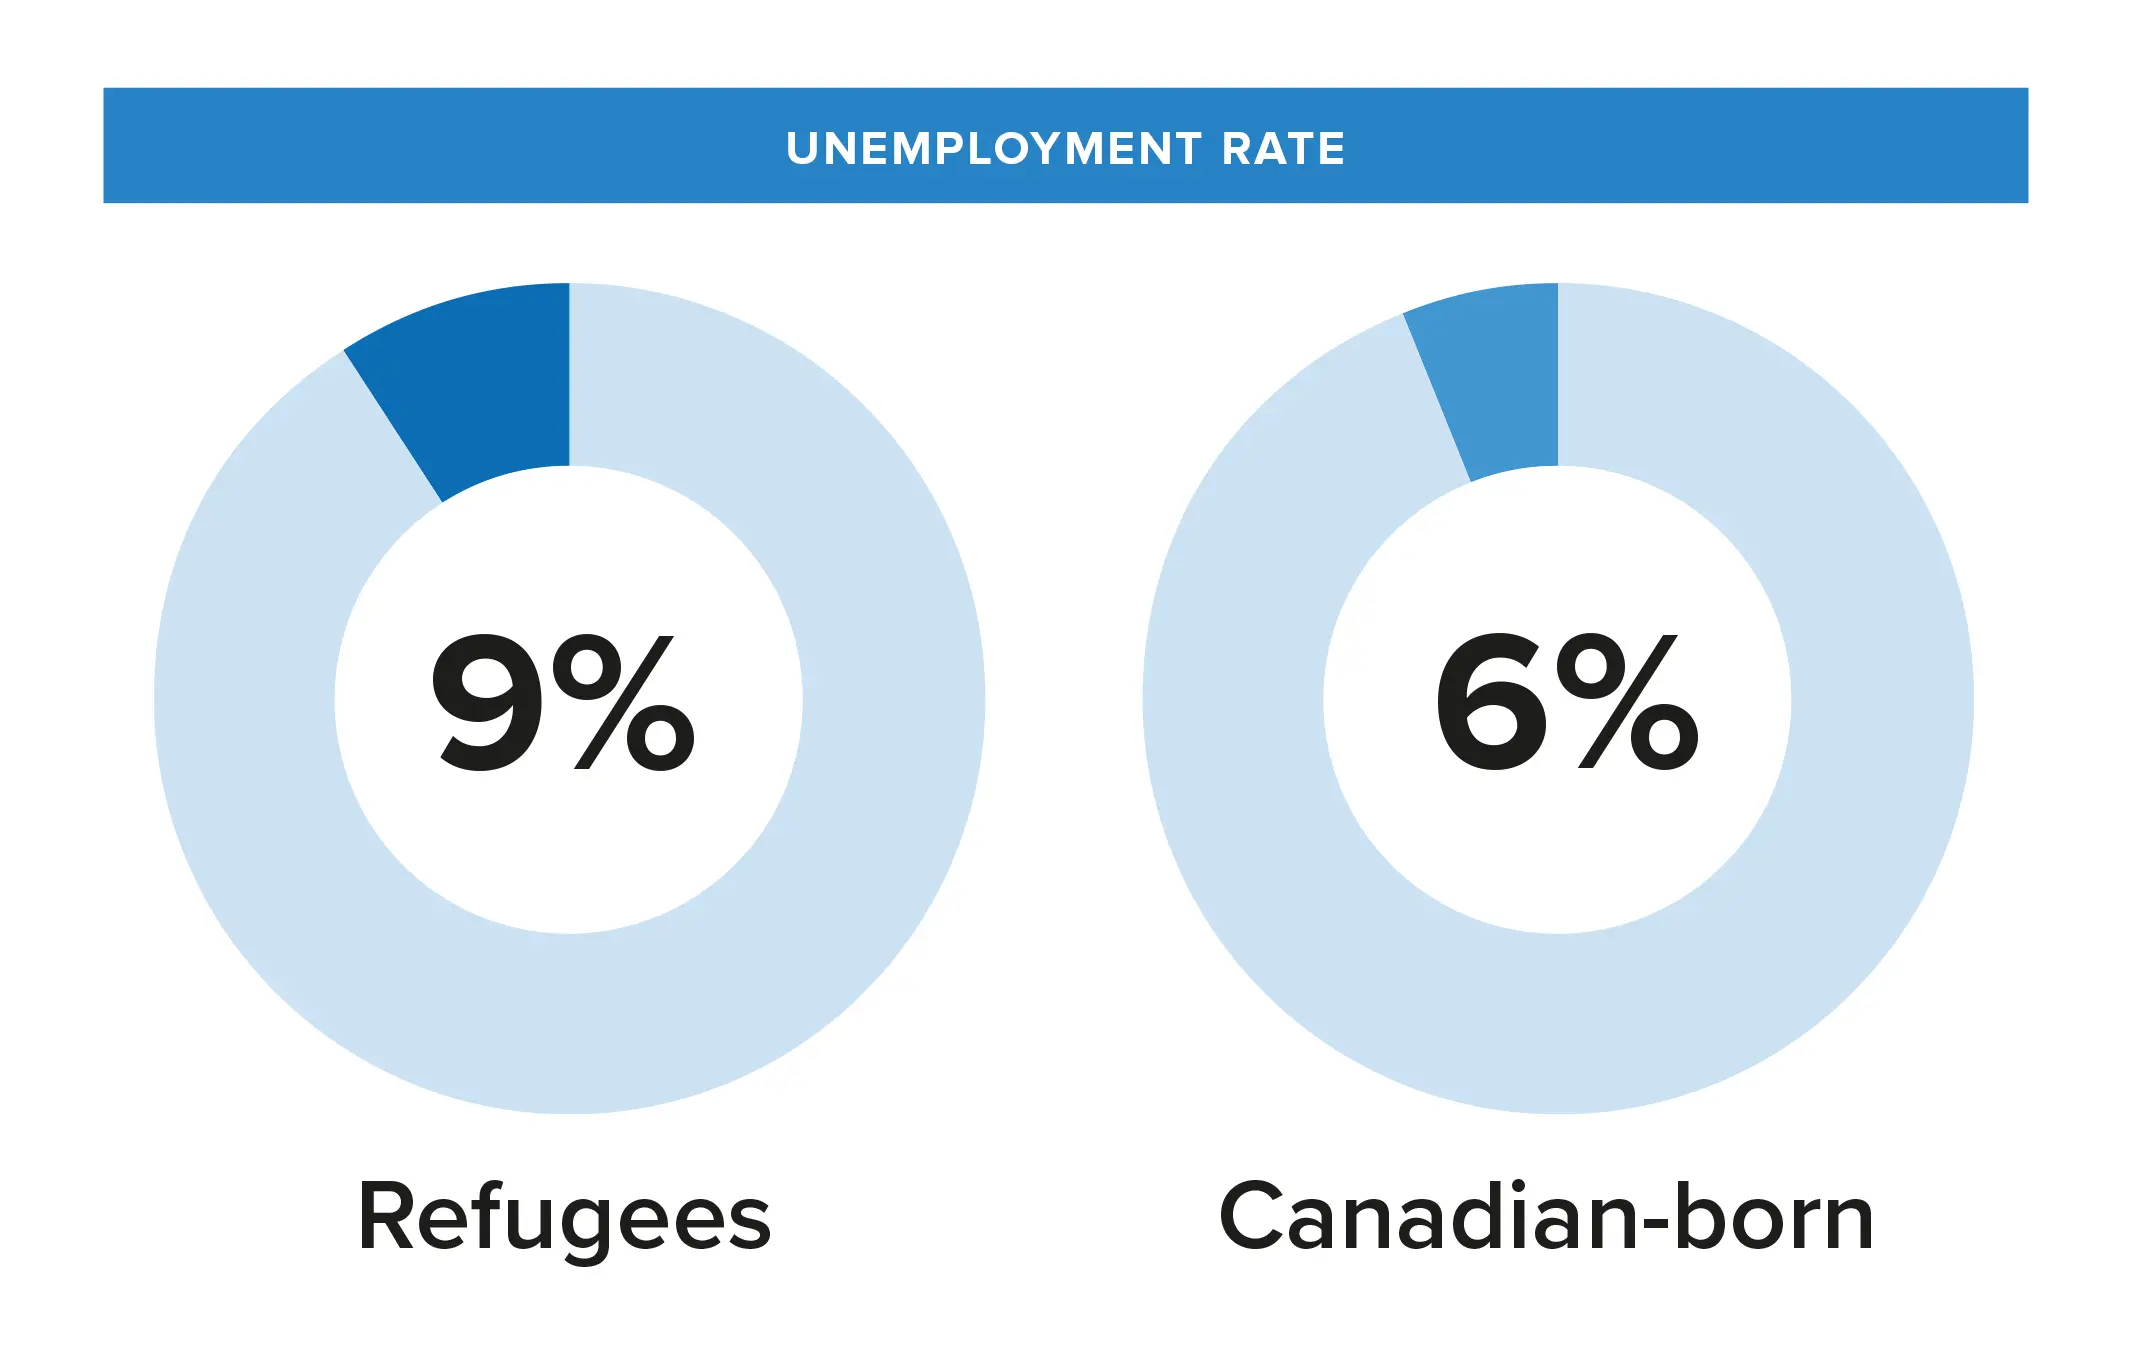 Graph showing unemployment rate for refugees versus Canadian-born citizens.